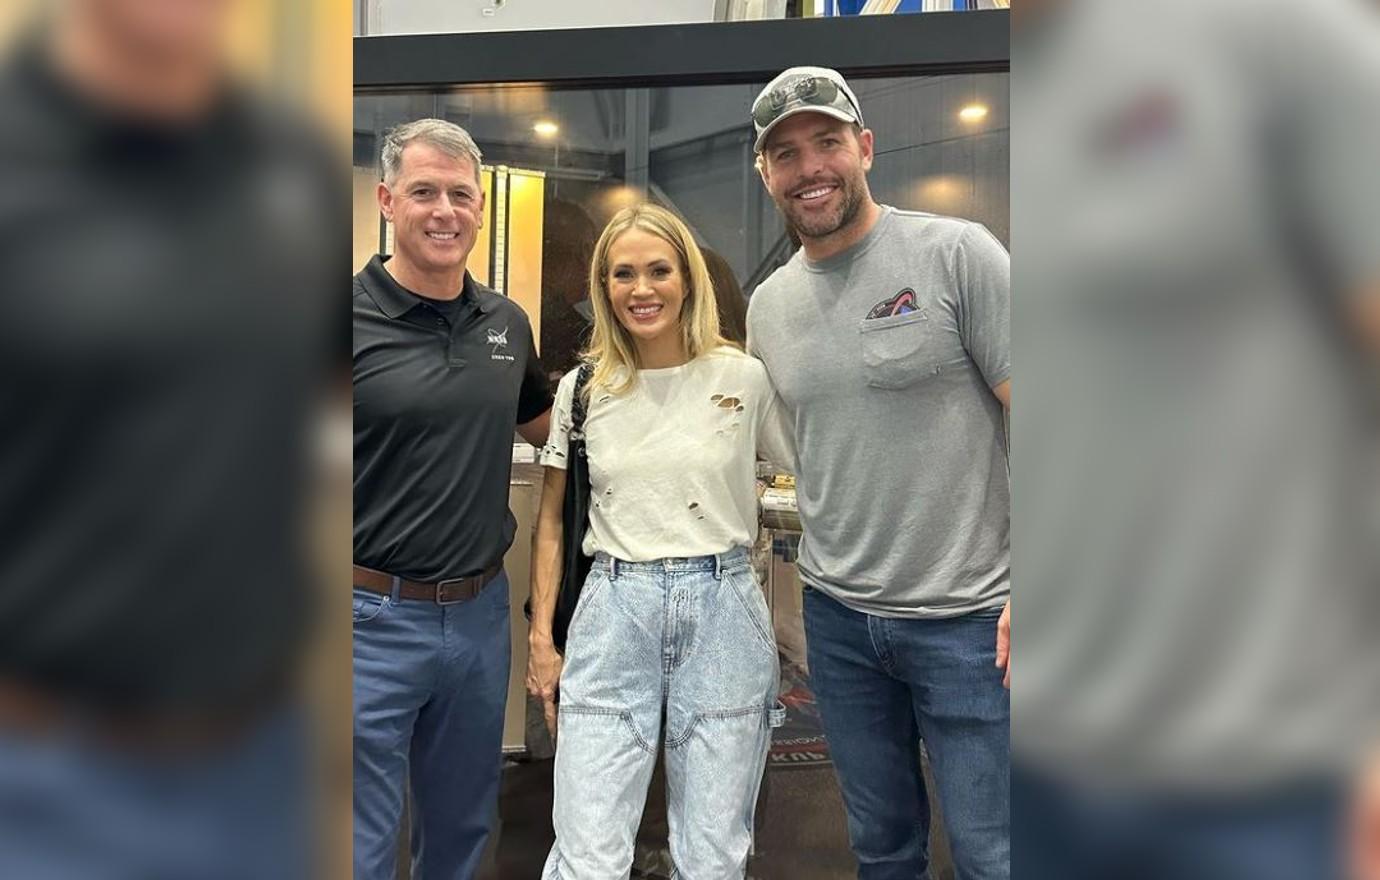 Carrie Underwood trolled by Mike Fisher on Twitter for all-denim look